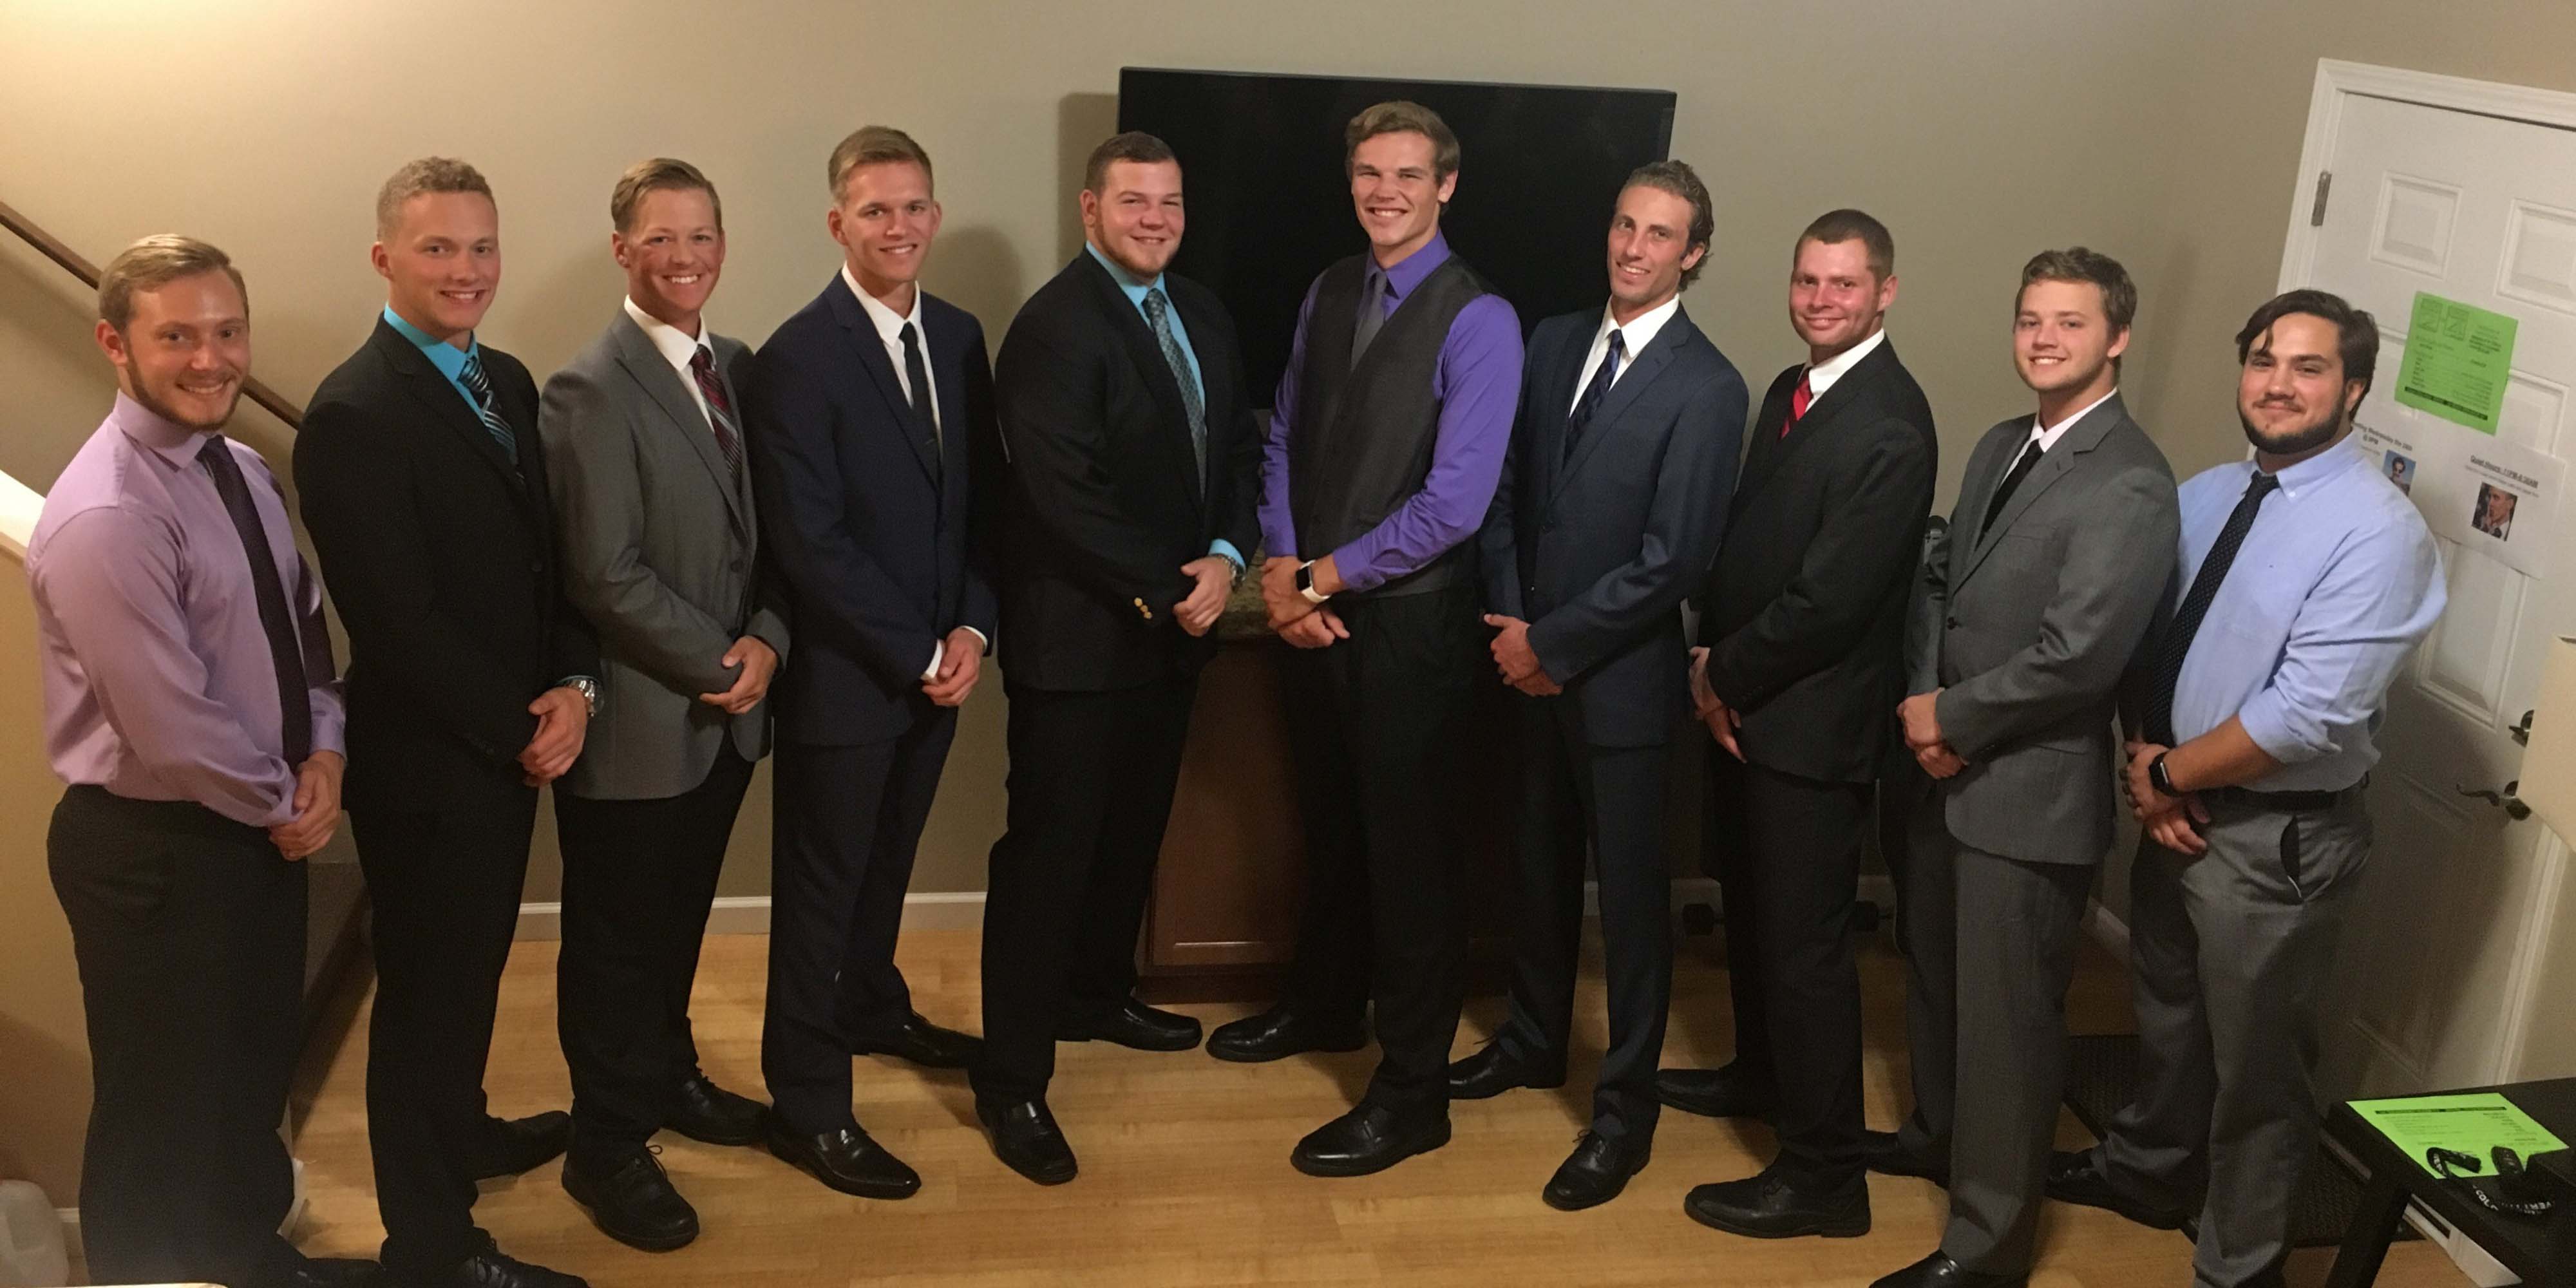 Photographed is CoolCorp founder Wesley Gensch with his current Grace College applied learning and internship students. Left to right are: Kyle Brunner, Chase Baker, Logan Swartzentruber, Austin Baker, Wesley Gensch, Jason Stevens, Logan Grigsby, John McCarty, Cole Helman and Peter Hoover.